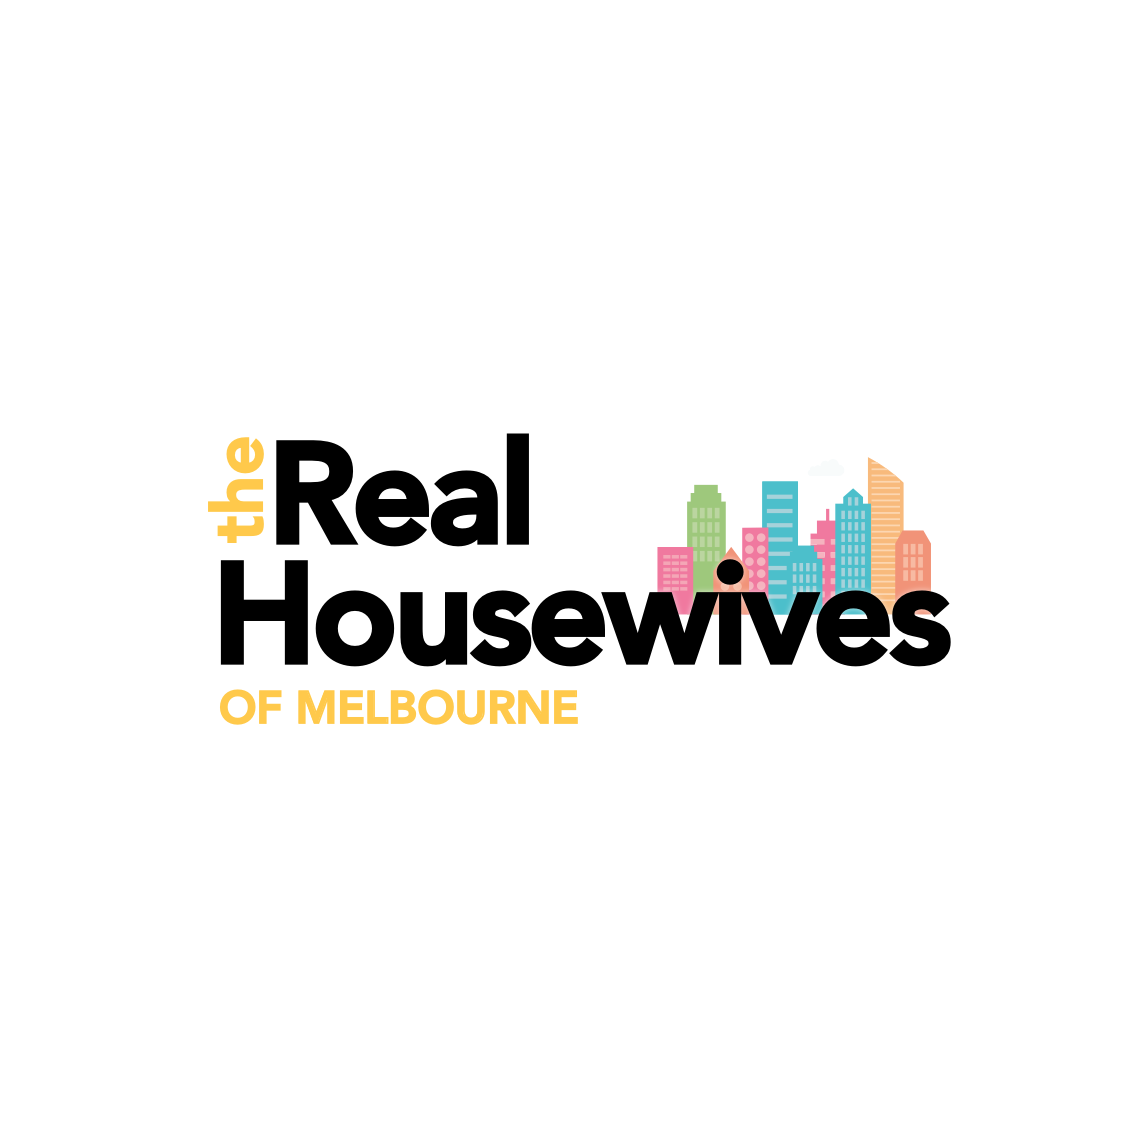 NEW: Watch The Real Housewives of Melbourne series 4 in the UK!